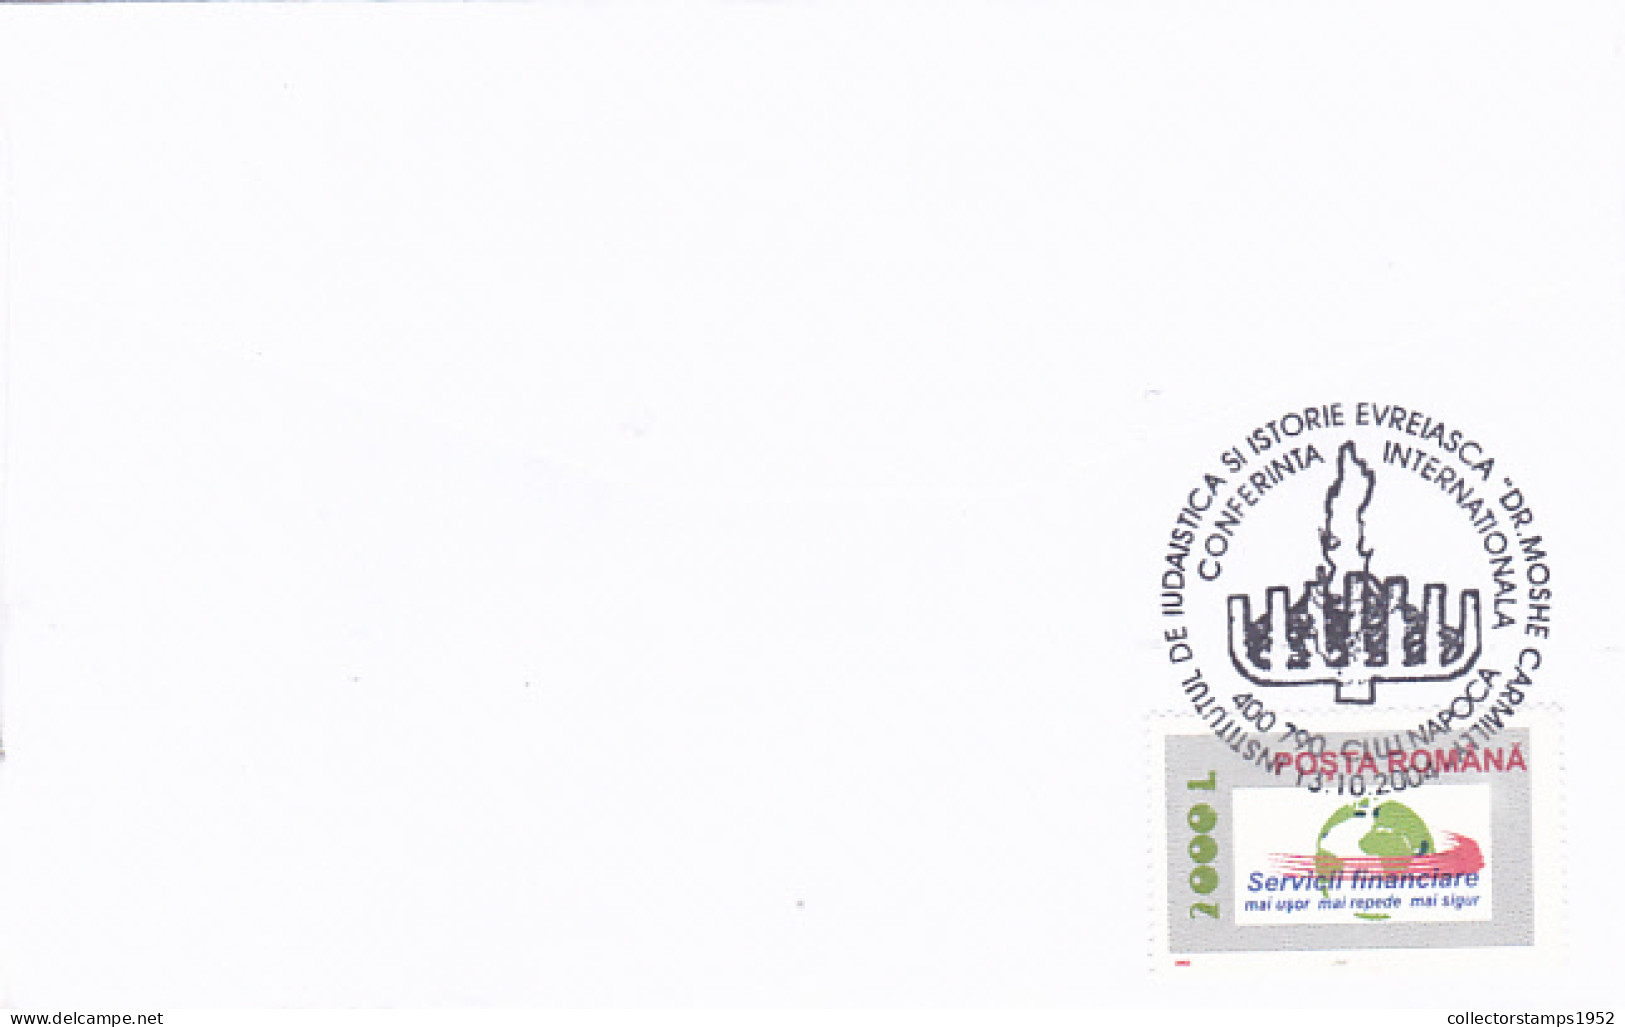 MOSHE CARMILLY JEWISH INSTITUTE, CONFERENCE, JEWISH, RELIGION, SPECIAL COVER, OVERPRINT STAMP, 2004, ROMANIA - Judaísmo